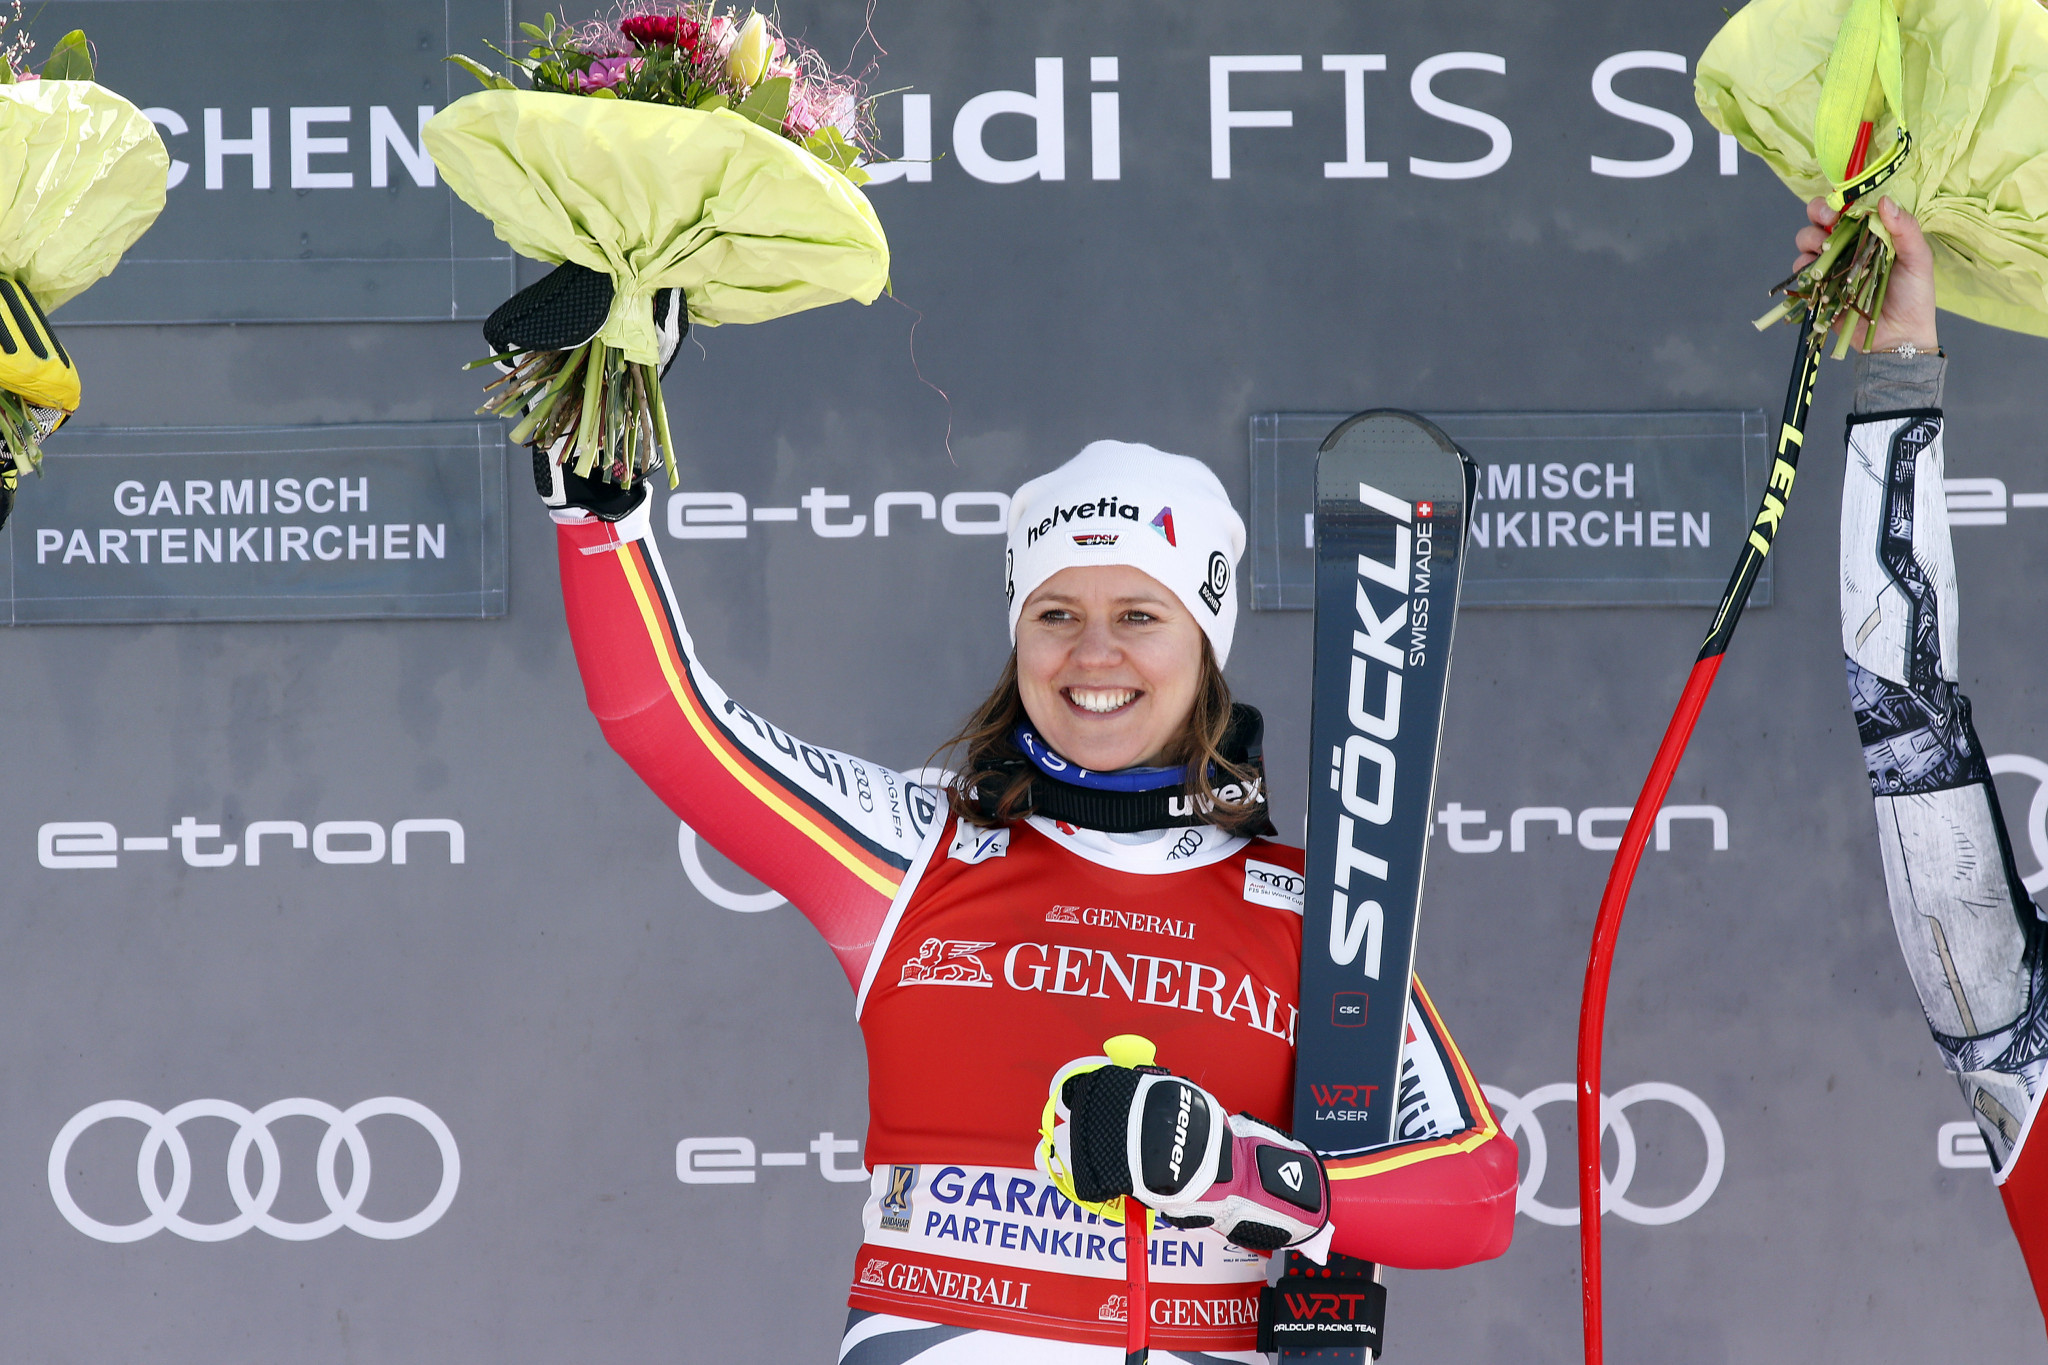 Former Olympic champion Rebensburg calls time on skiing career aged 30